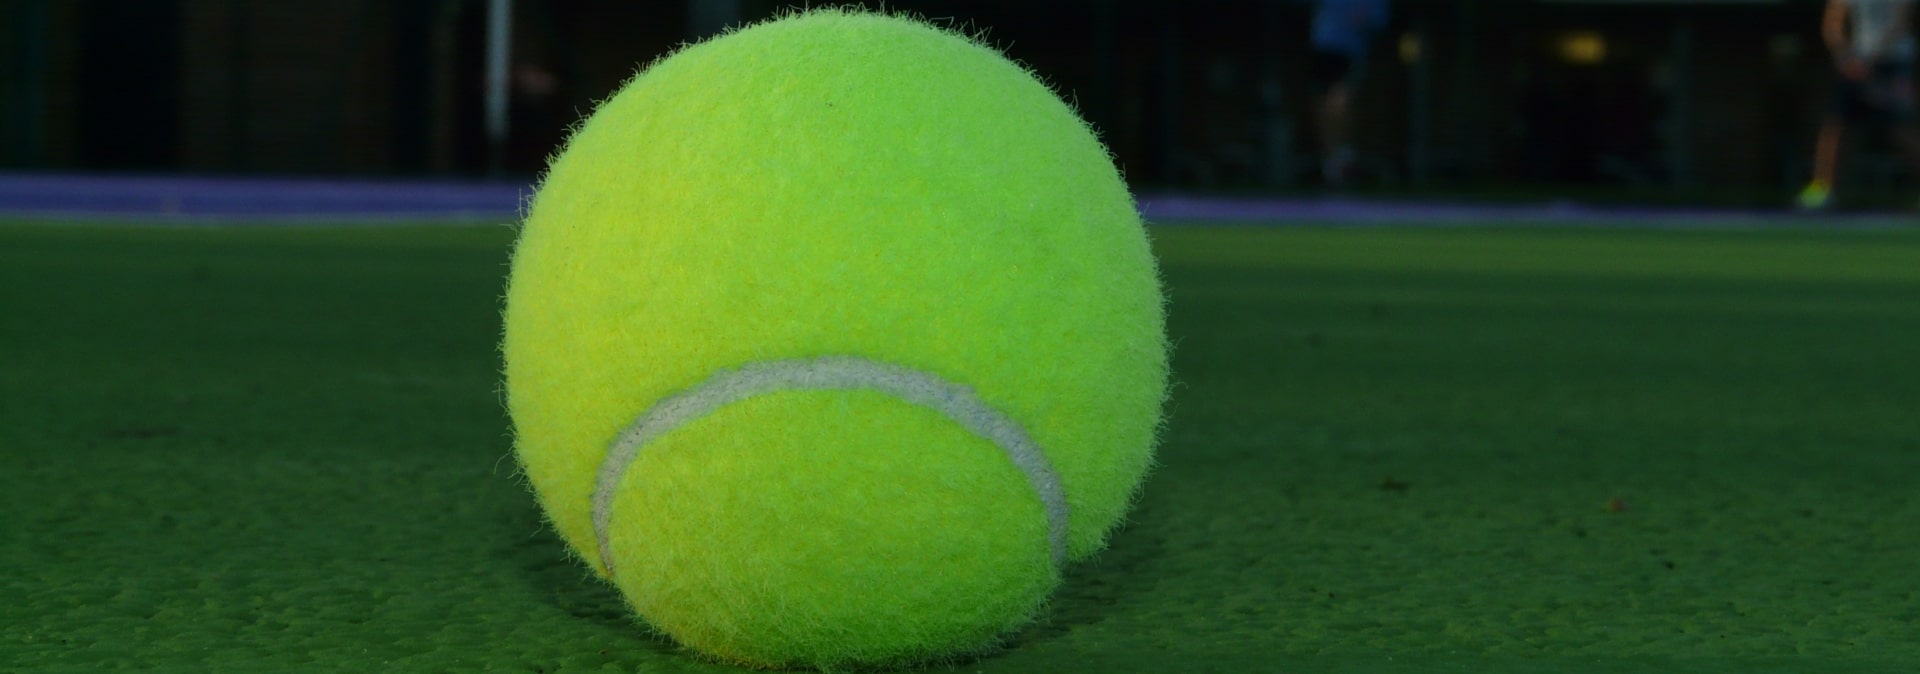 Tennis ball in the middle of court 8 with a blurred background to depict privacy